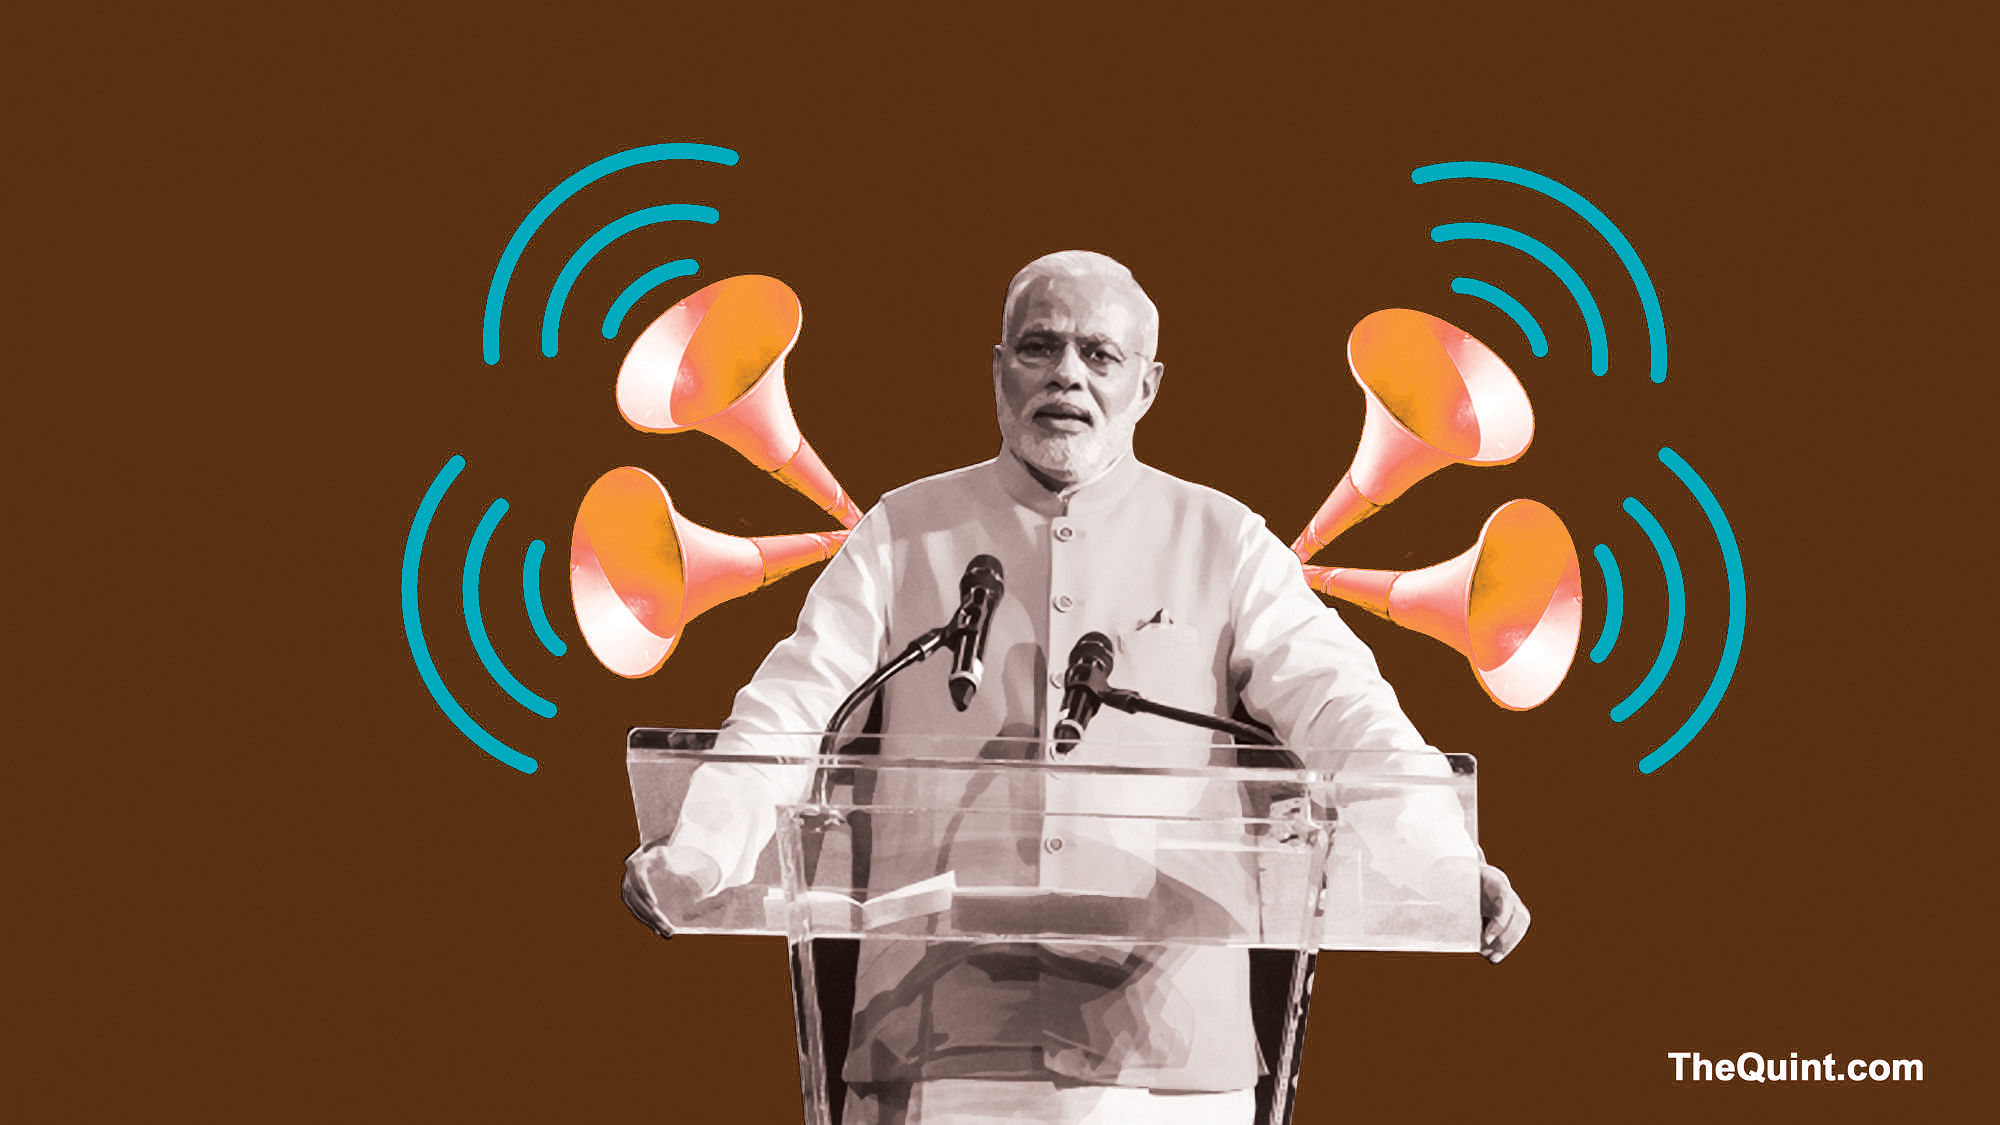 A heady mix of populism and nativism, that caters to inherent fears of masses, is behind Modi’s stupendous rise. (Photo: <b>The Quint</b>)